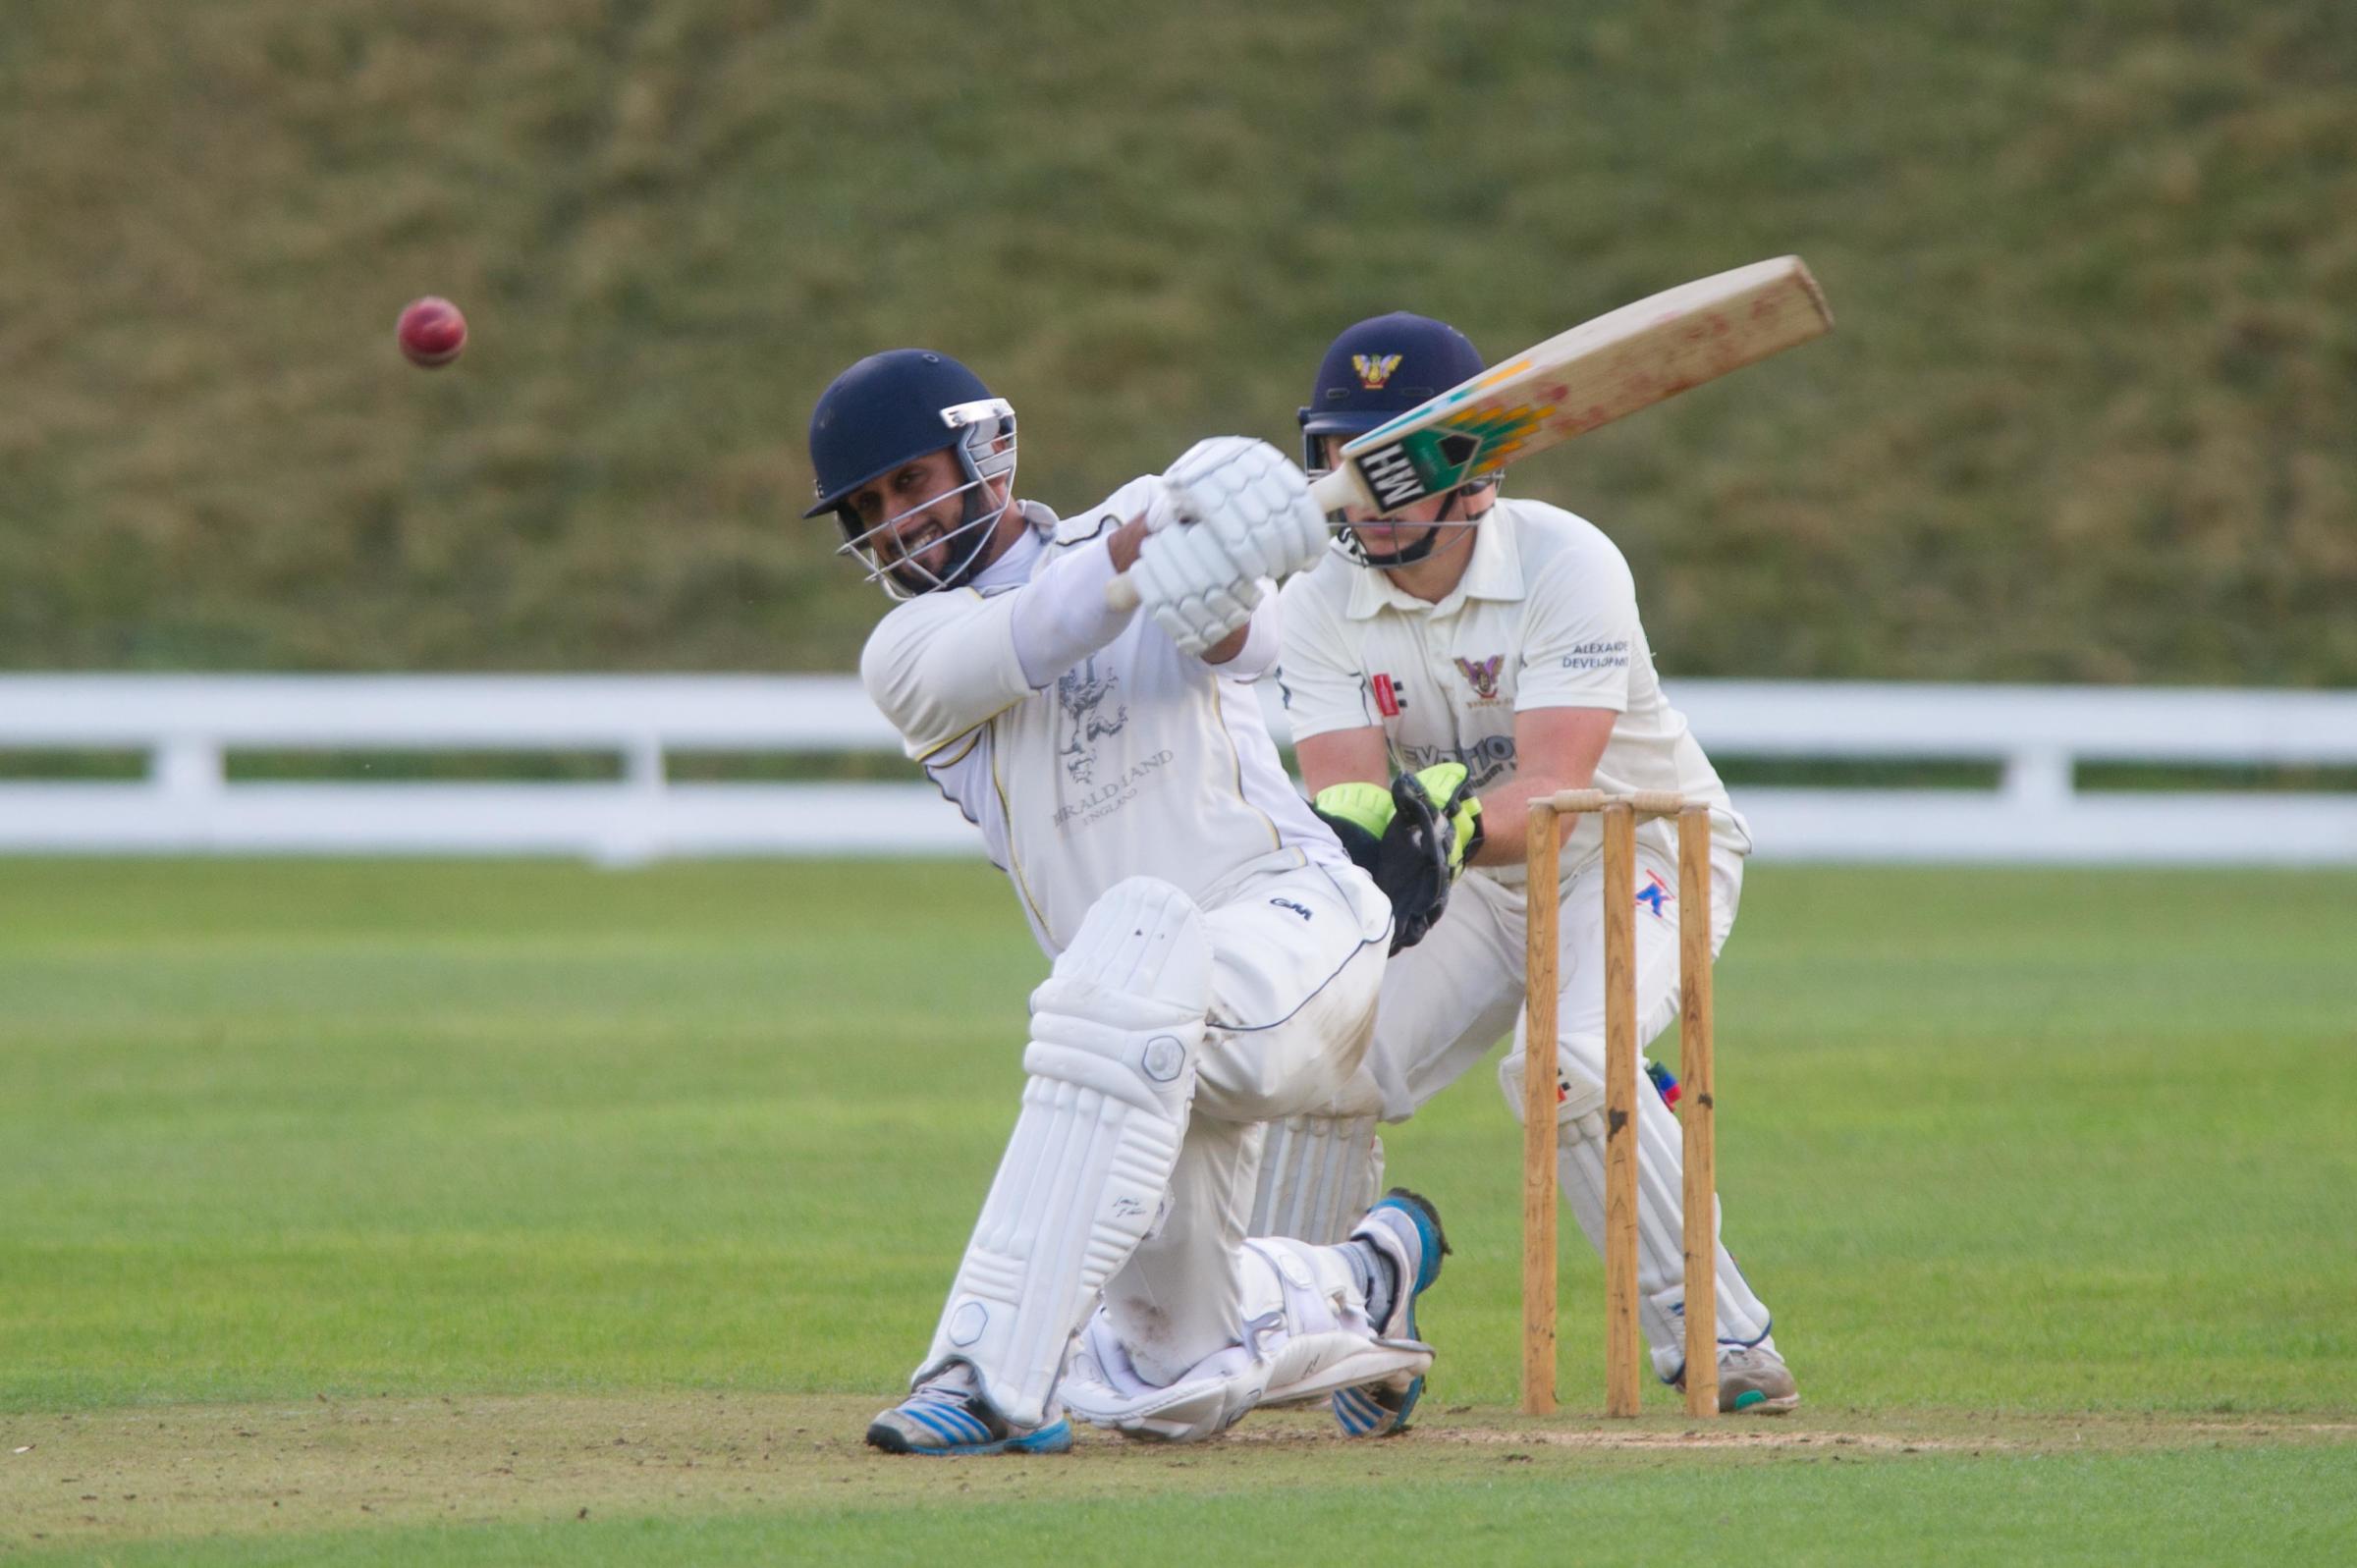 Imran Hassans superb century wasnt enough for Newport